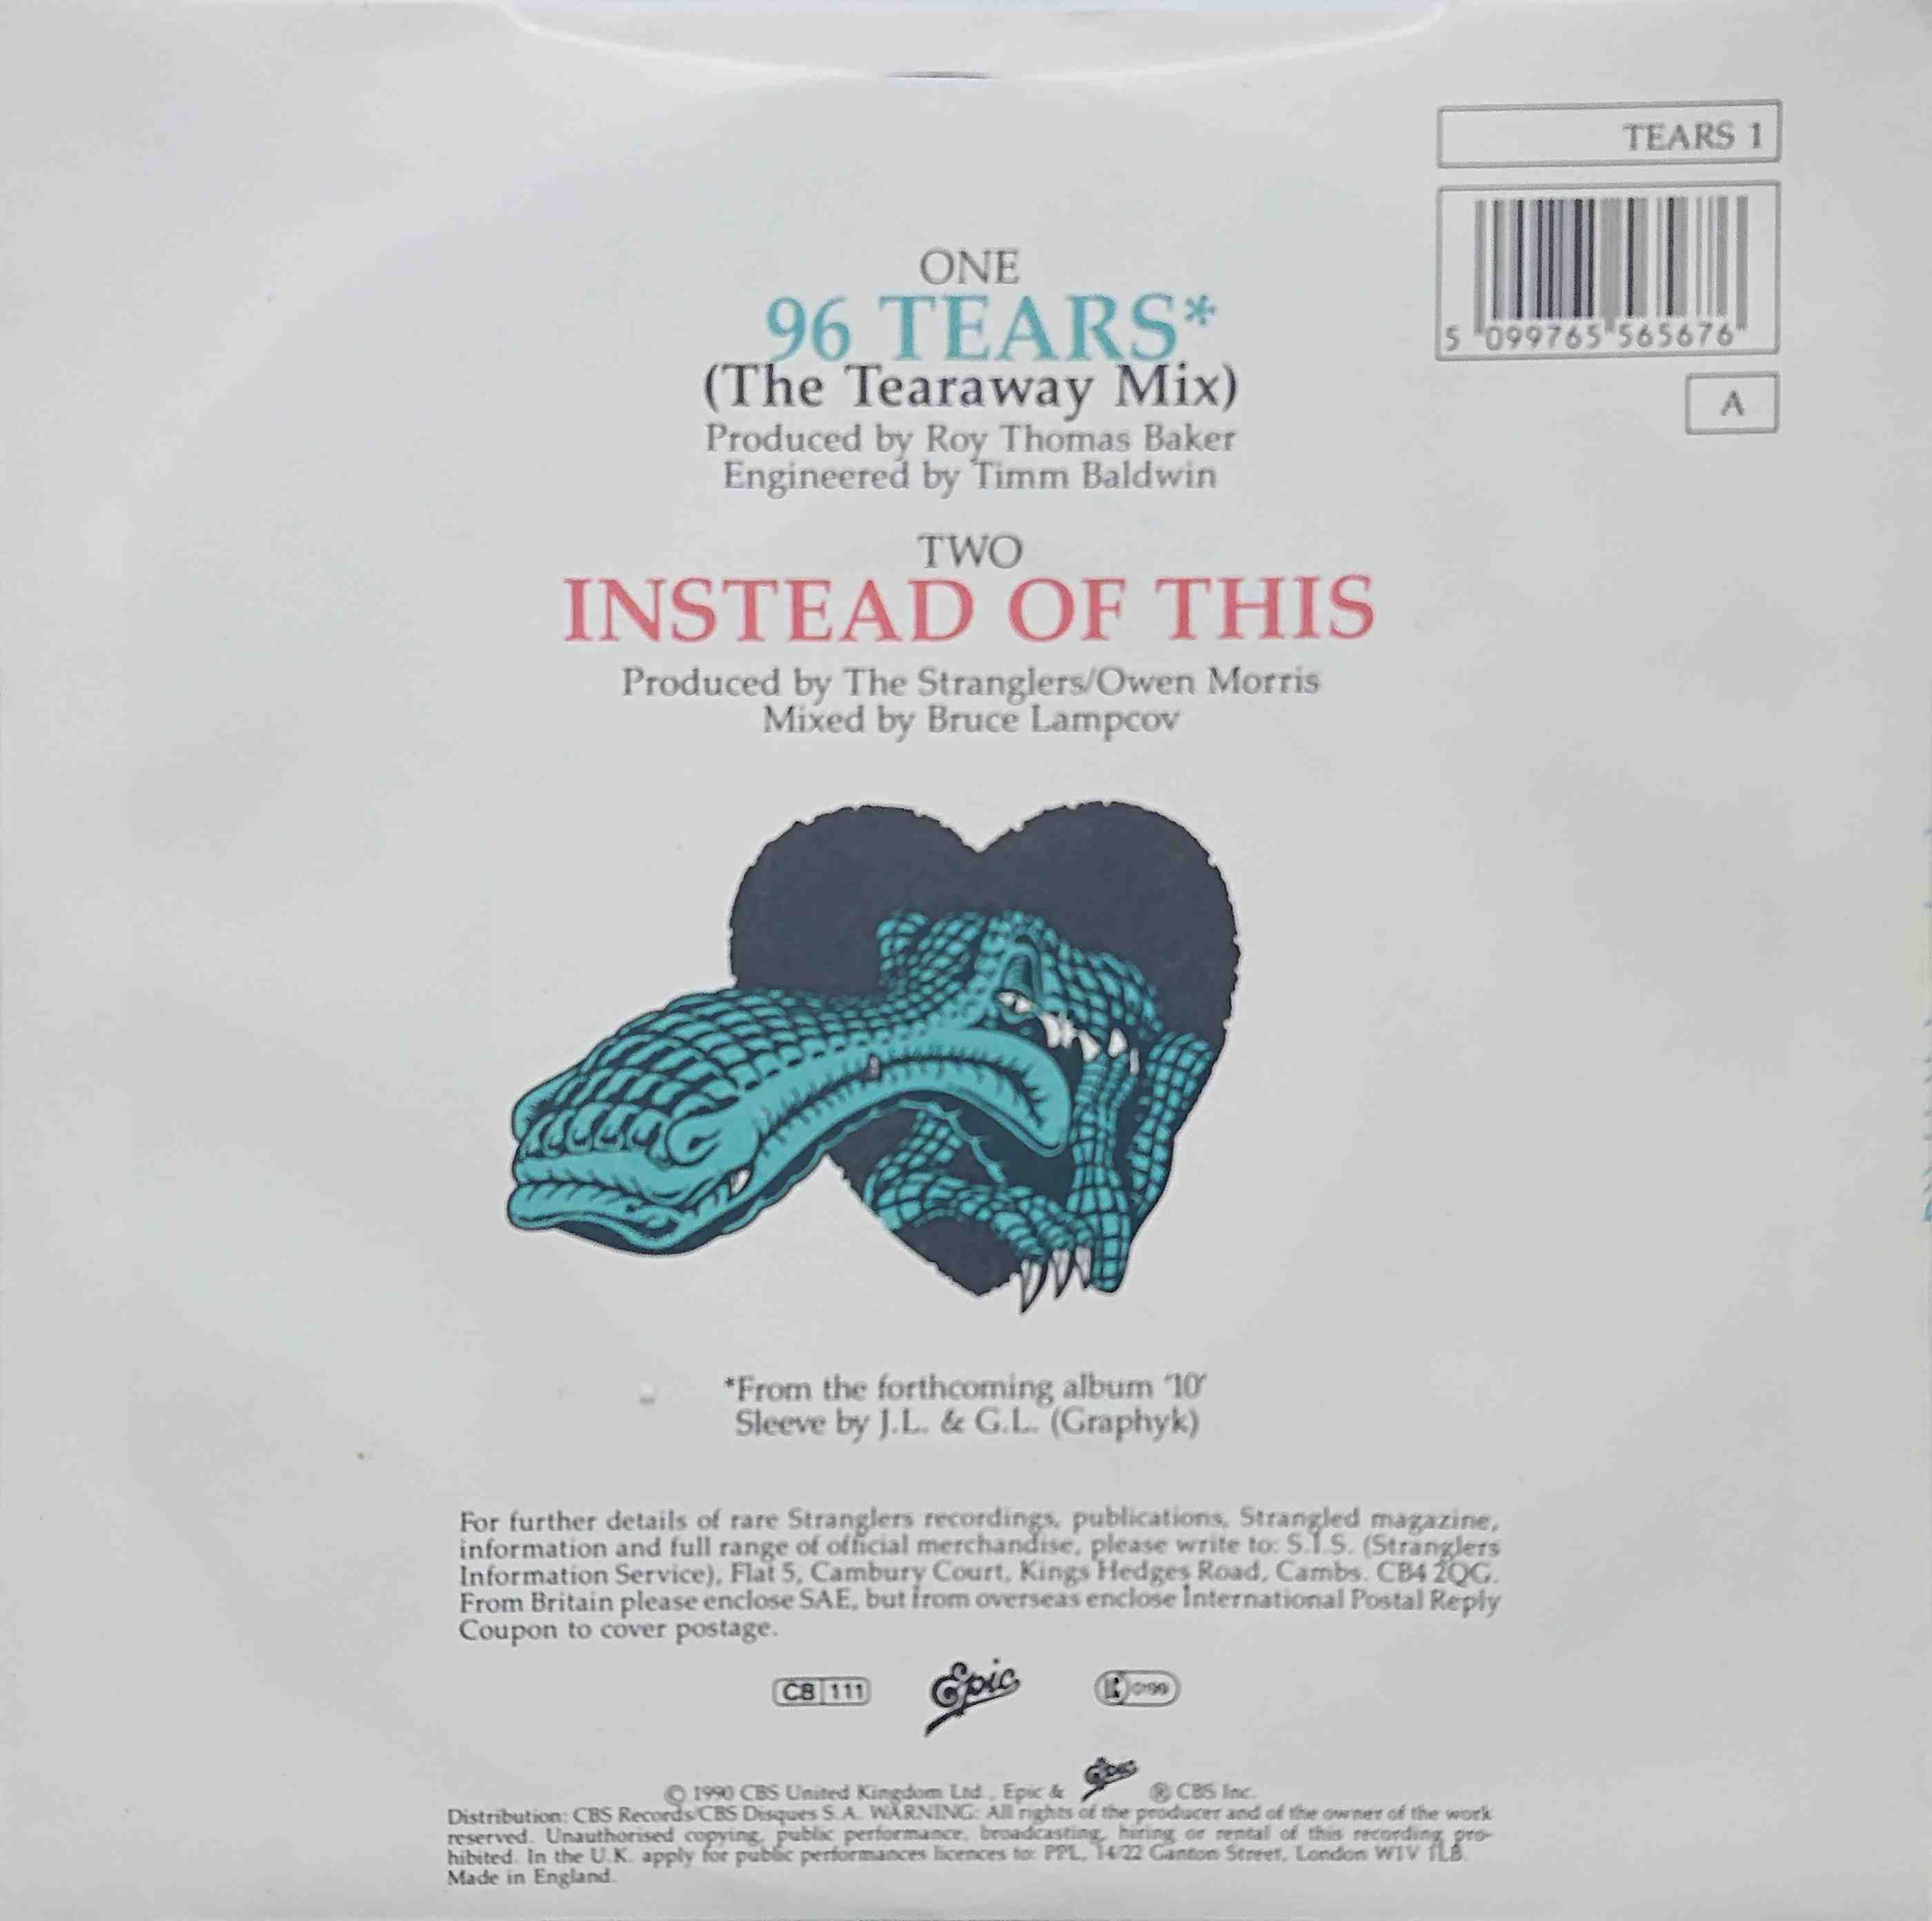 Back cover of TEARS 1